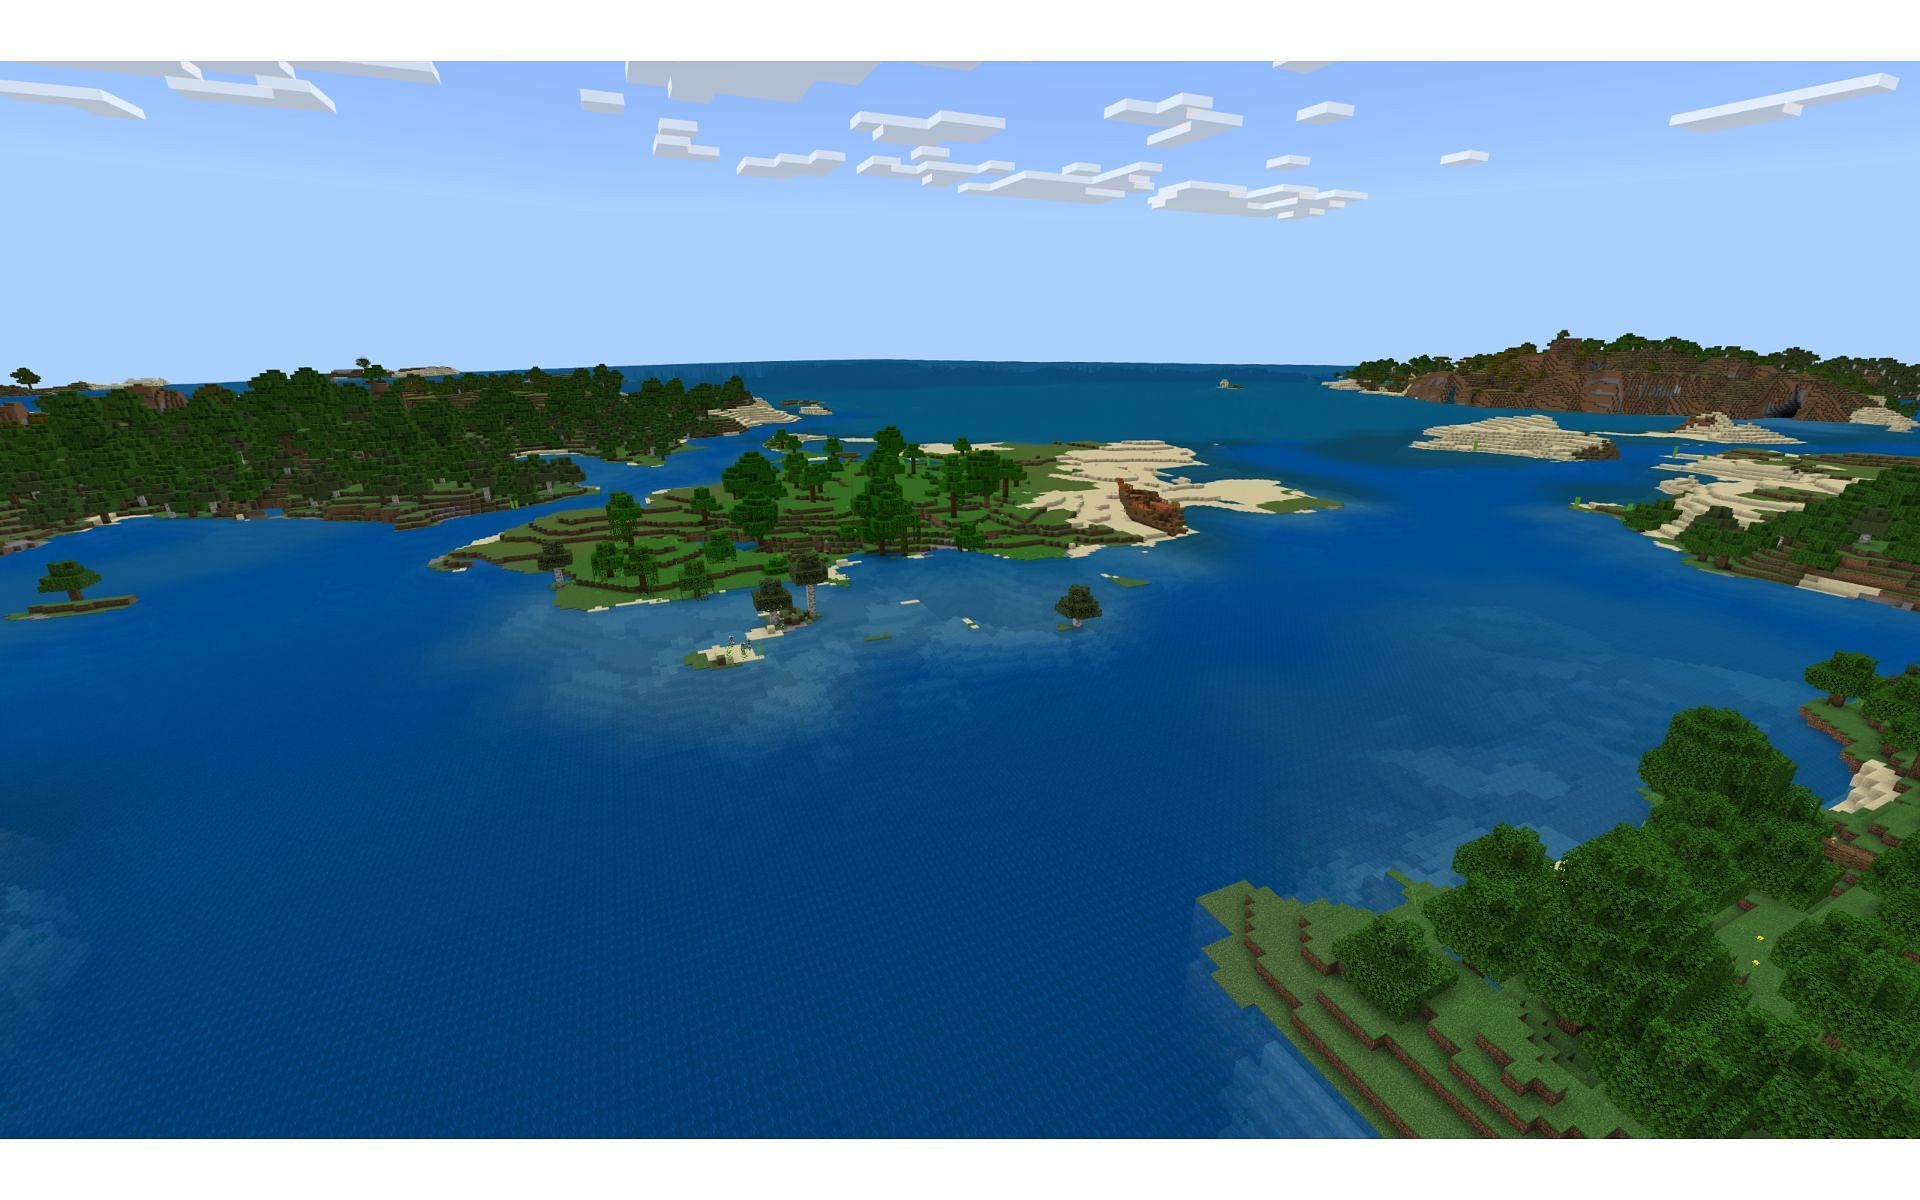 Explore these islands that are covered in shipwrecks and find buried treasure (Image via Mojang)